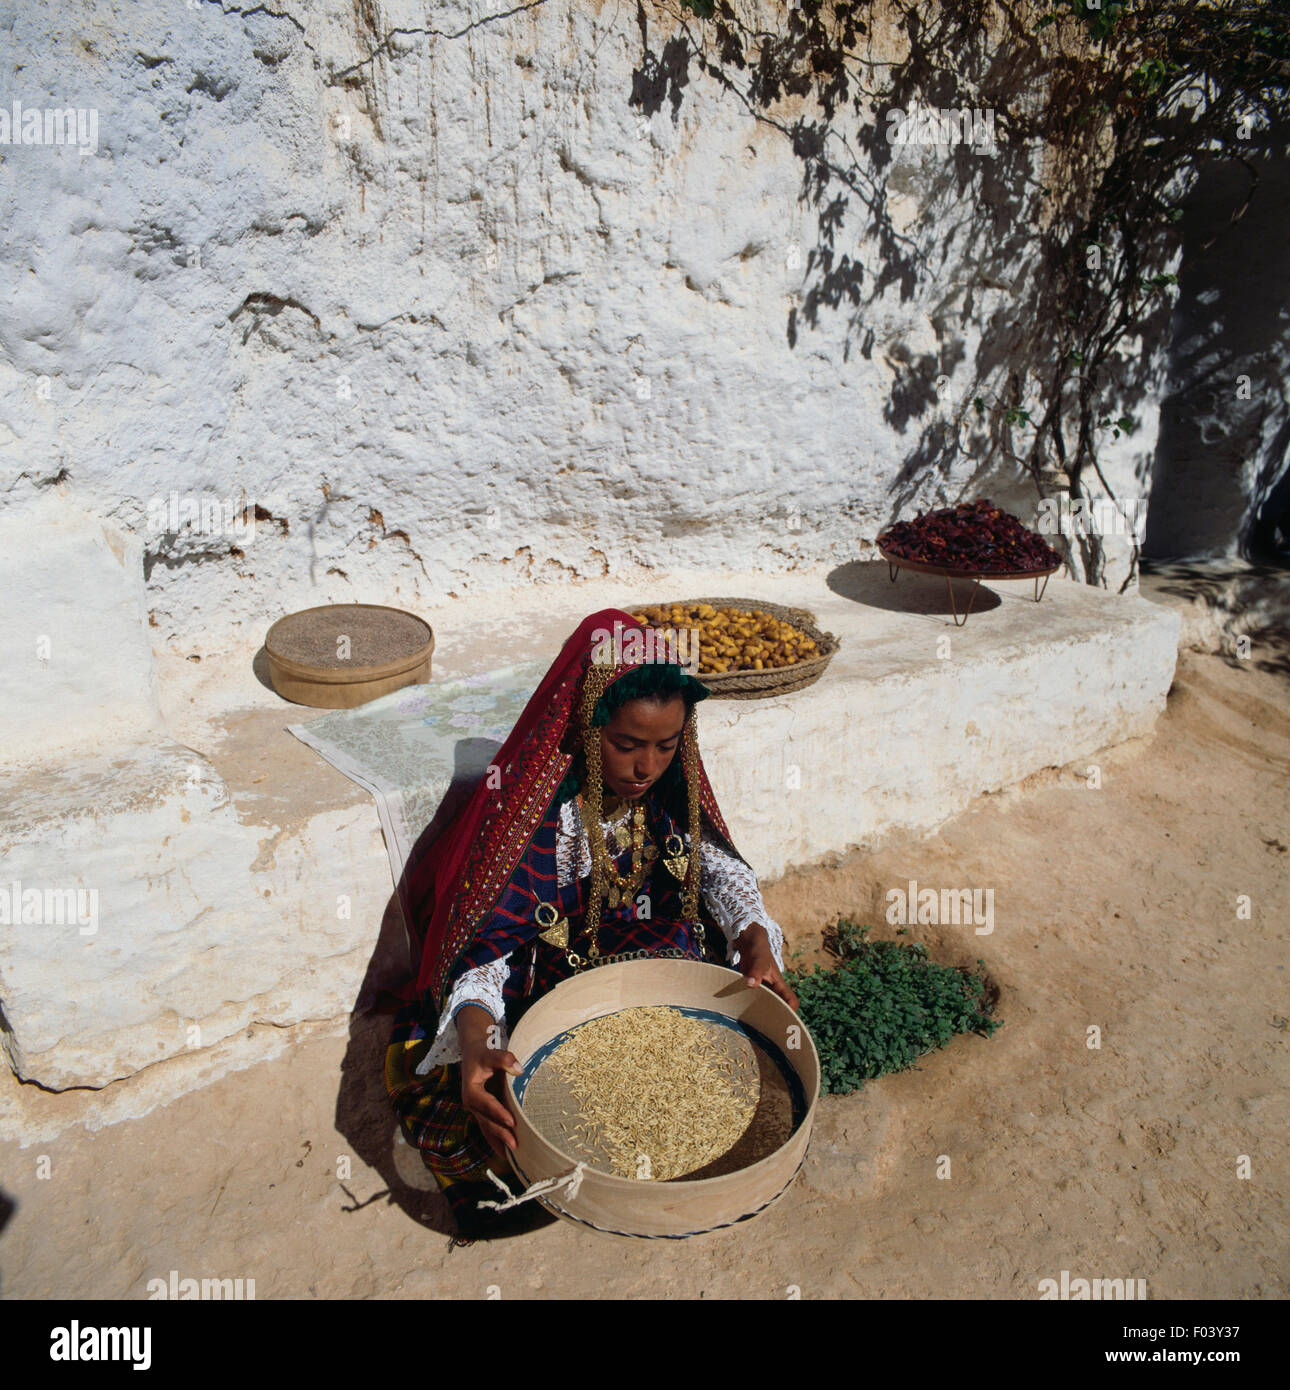 Berber girl in traditional clothes with a sieve, Matmata, Tunisia. Stock Photo